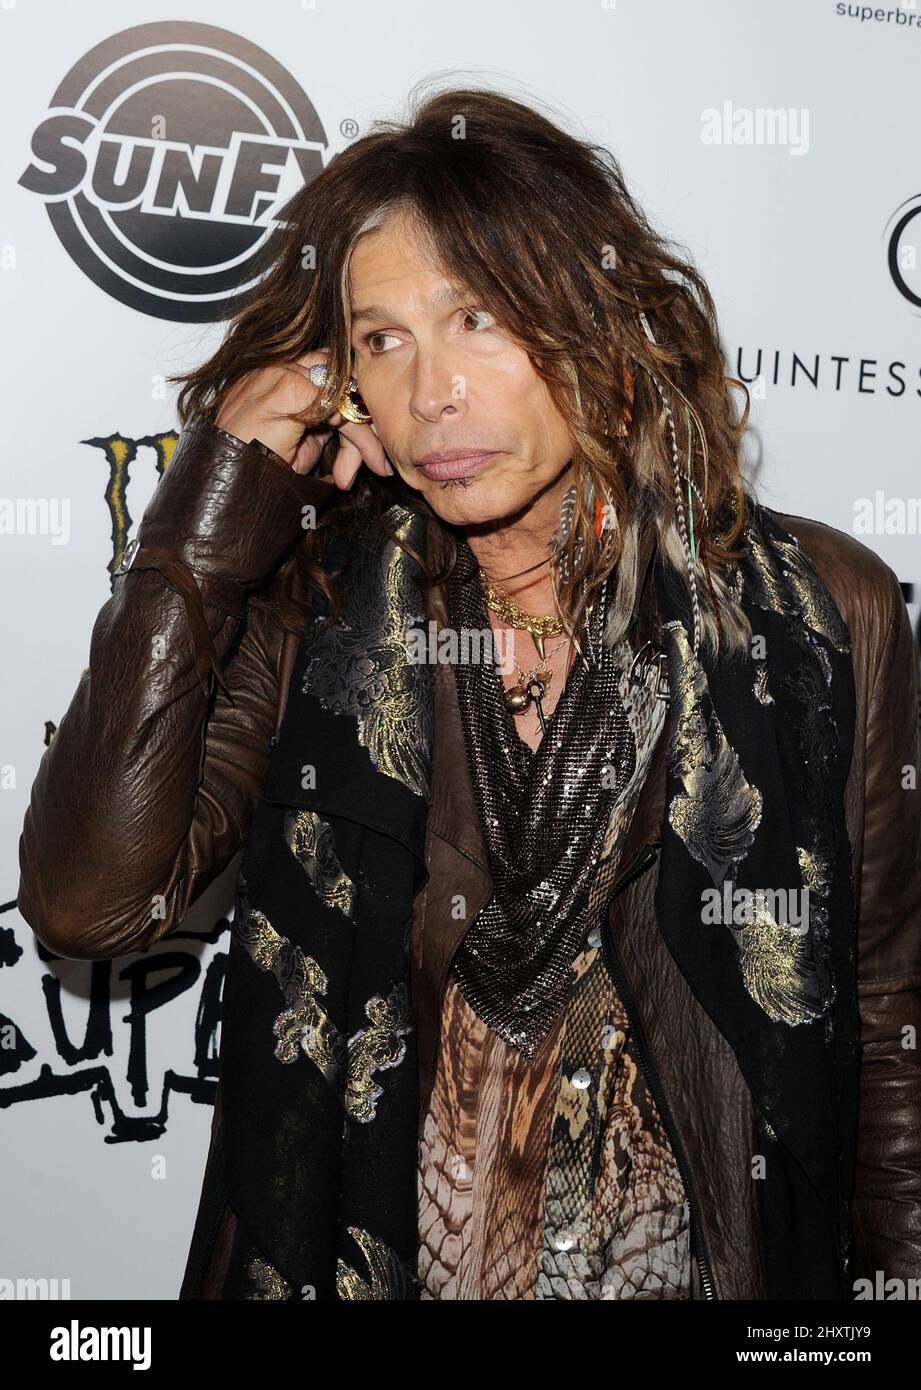 Steven Tyler during the 'Super' Los Angeles Premiere held at the Egyptian Theatre, Hollywood, California Stock Photo